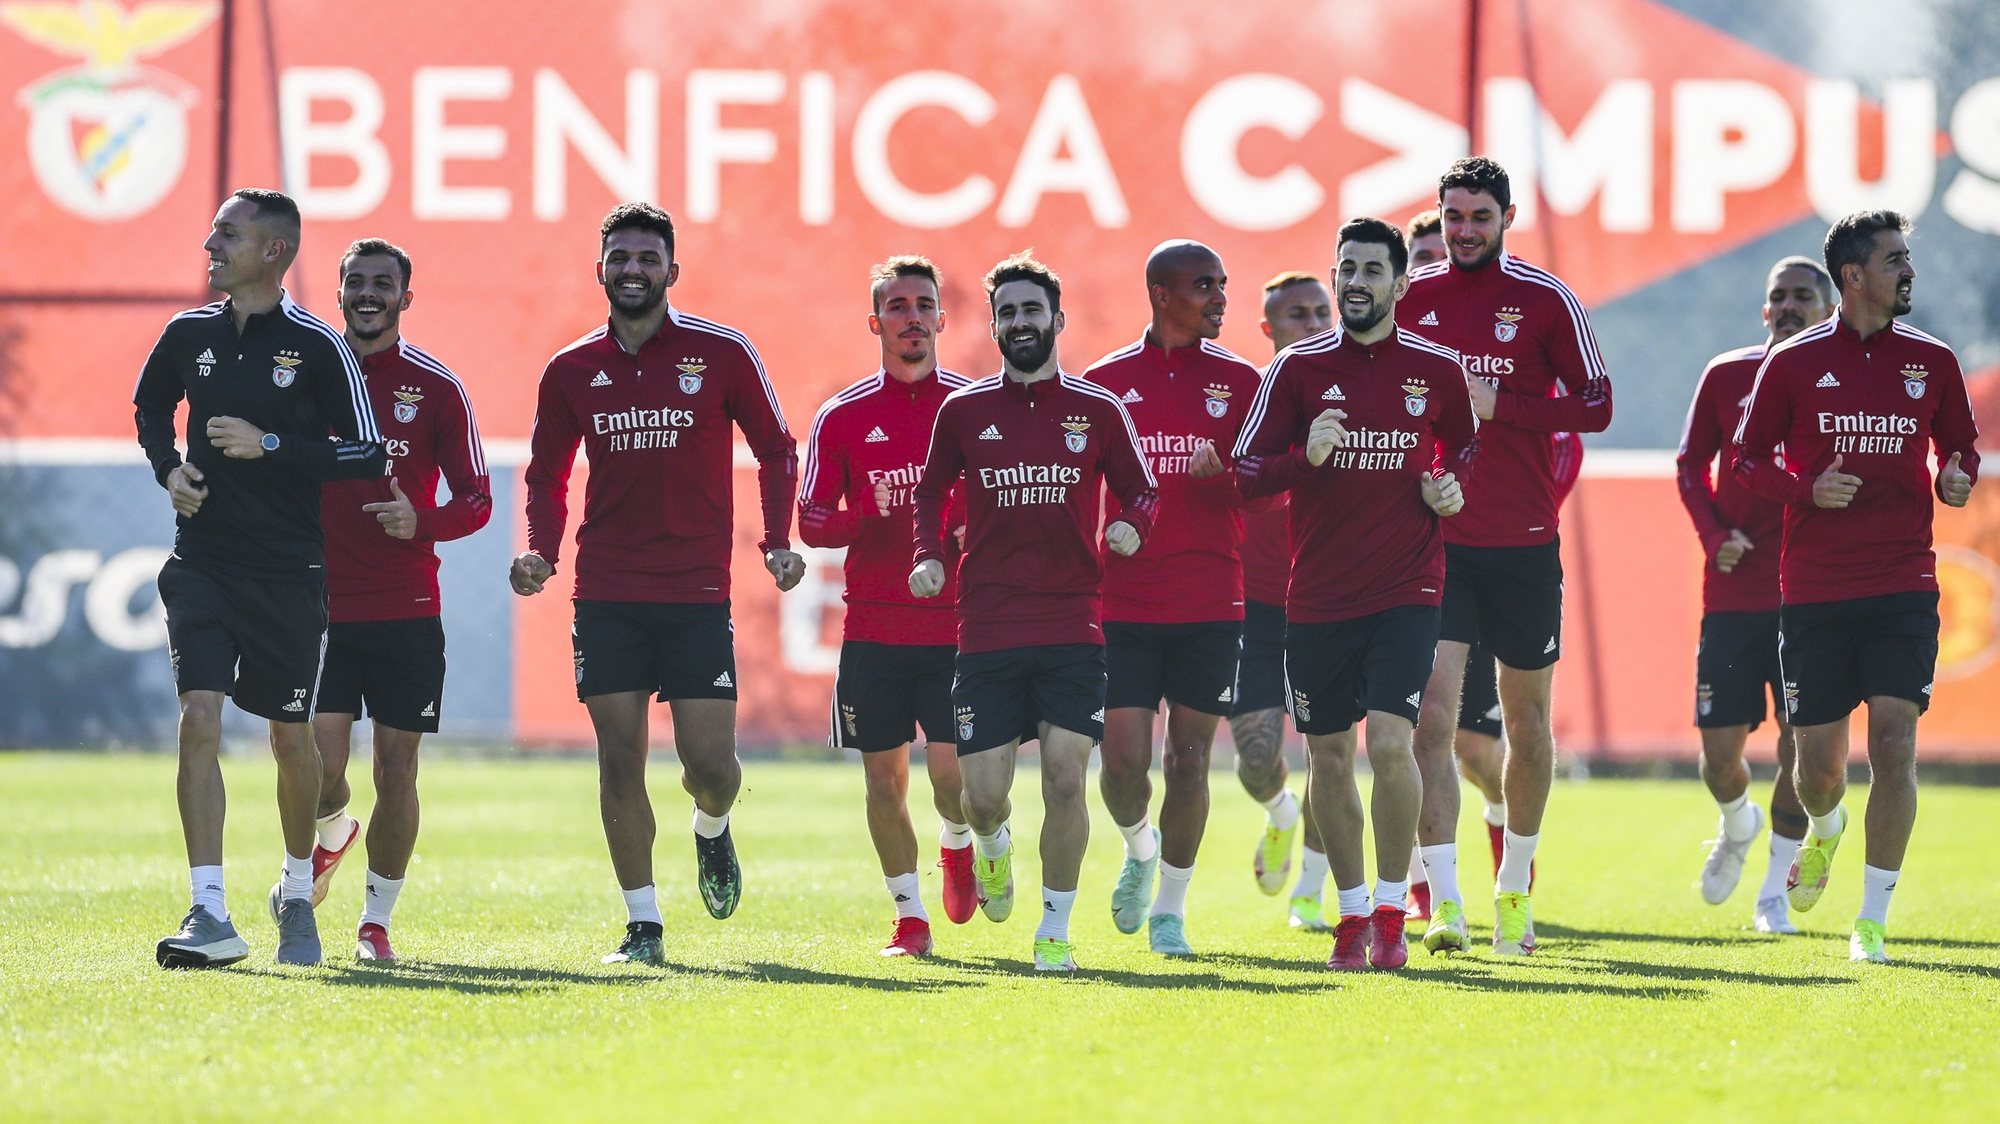 Benfica&#039;s players attend their team&#039;s training session at Benfica&#039;s training camp in Seixal, Portugal, 19 October 2021. Benfica will face Bayern Munich in their UEFA Champion League group E soccer match on 20th October 2021. ANTONIO COTRIM/LUSA